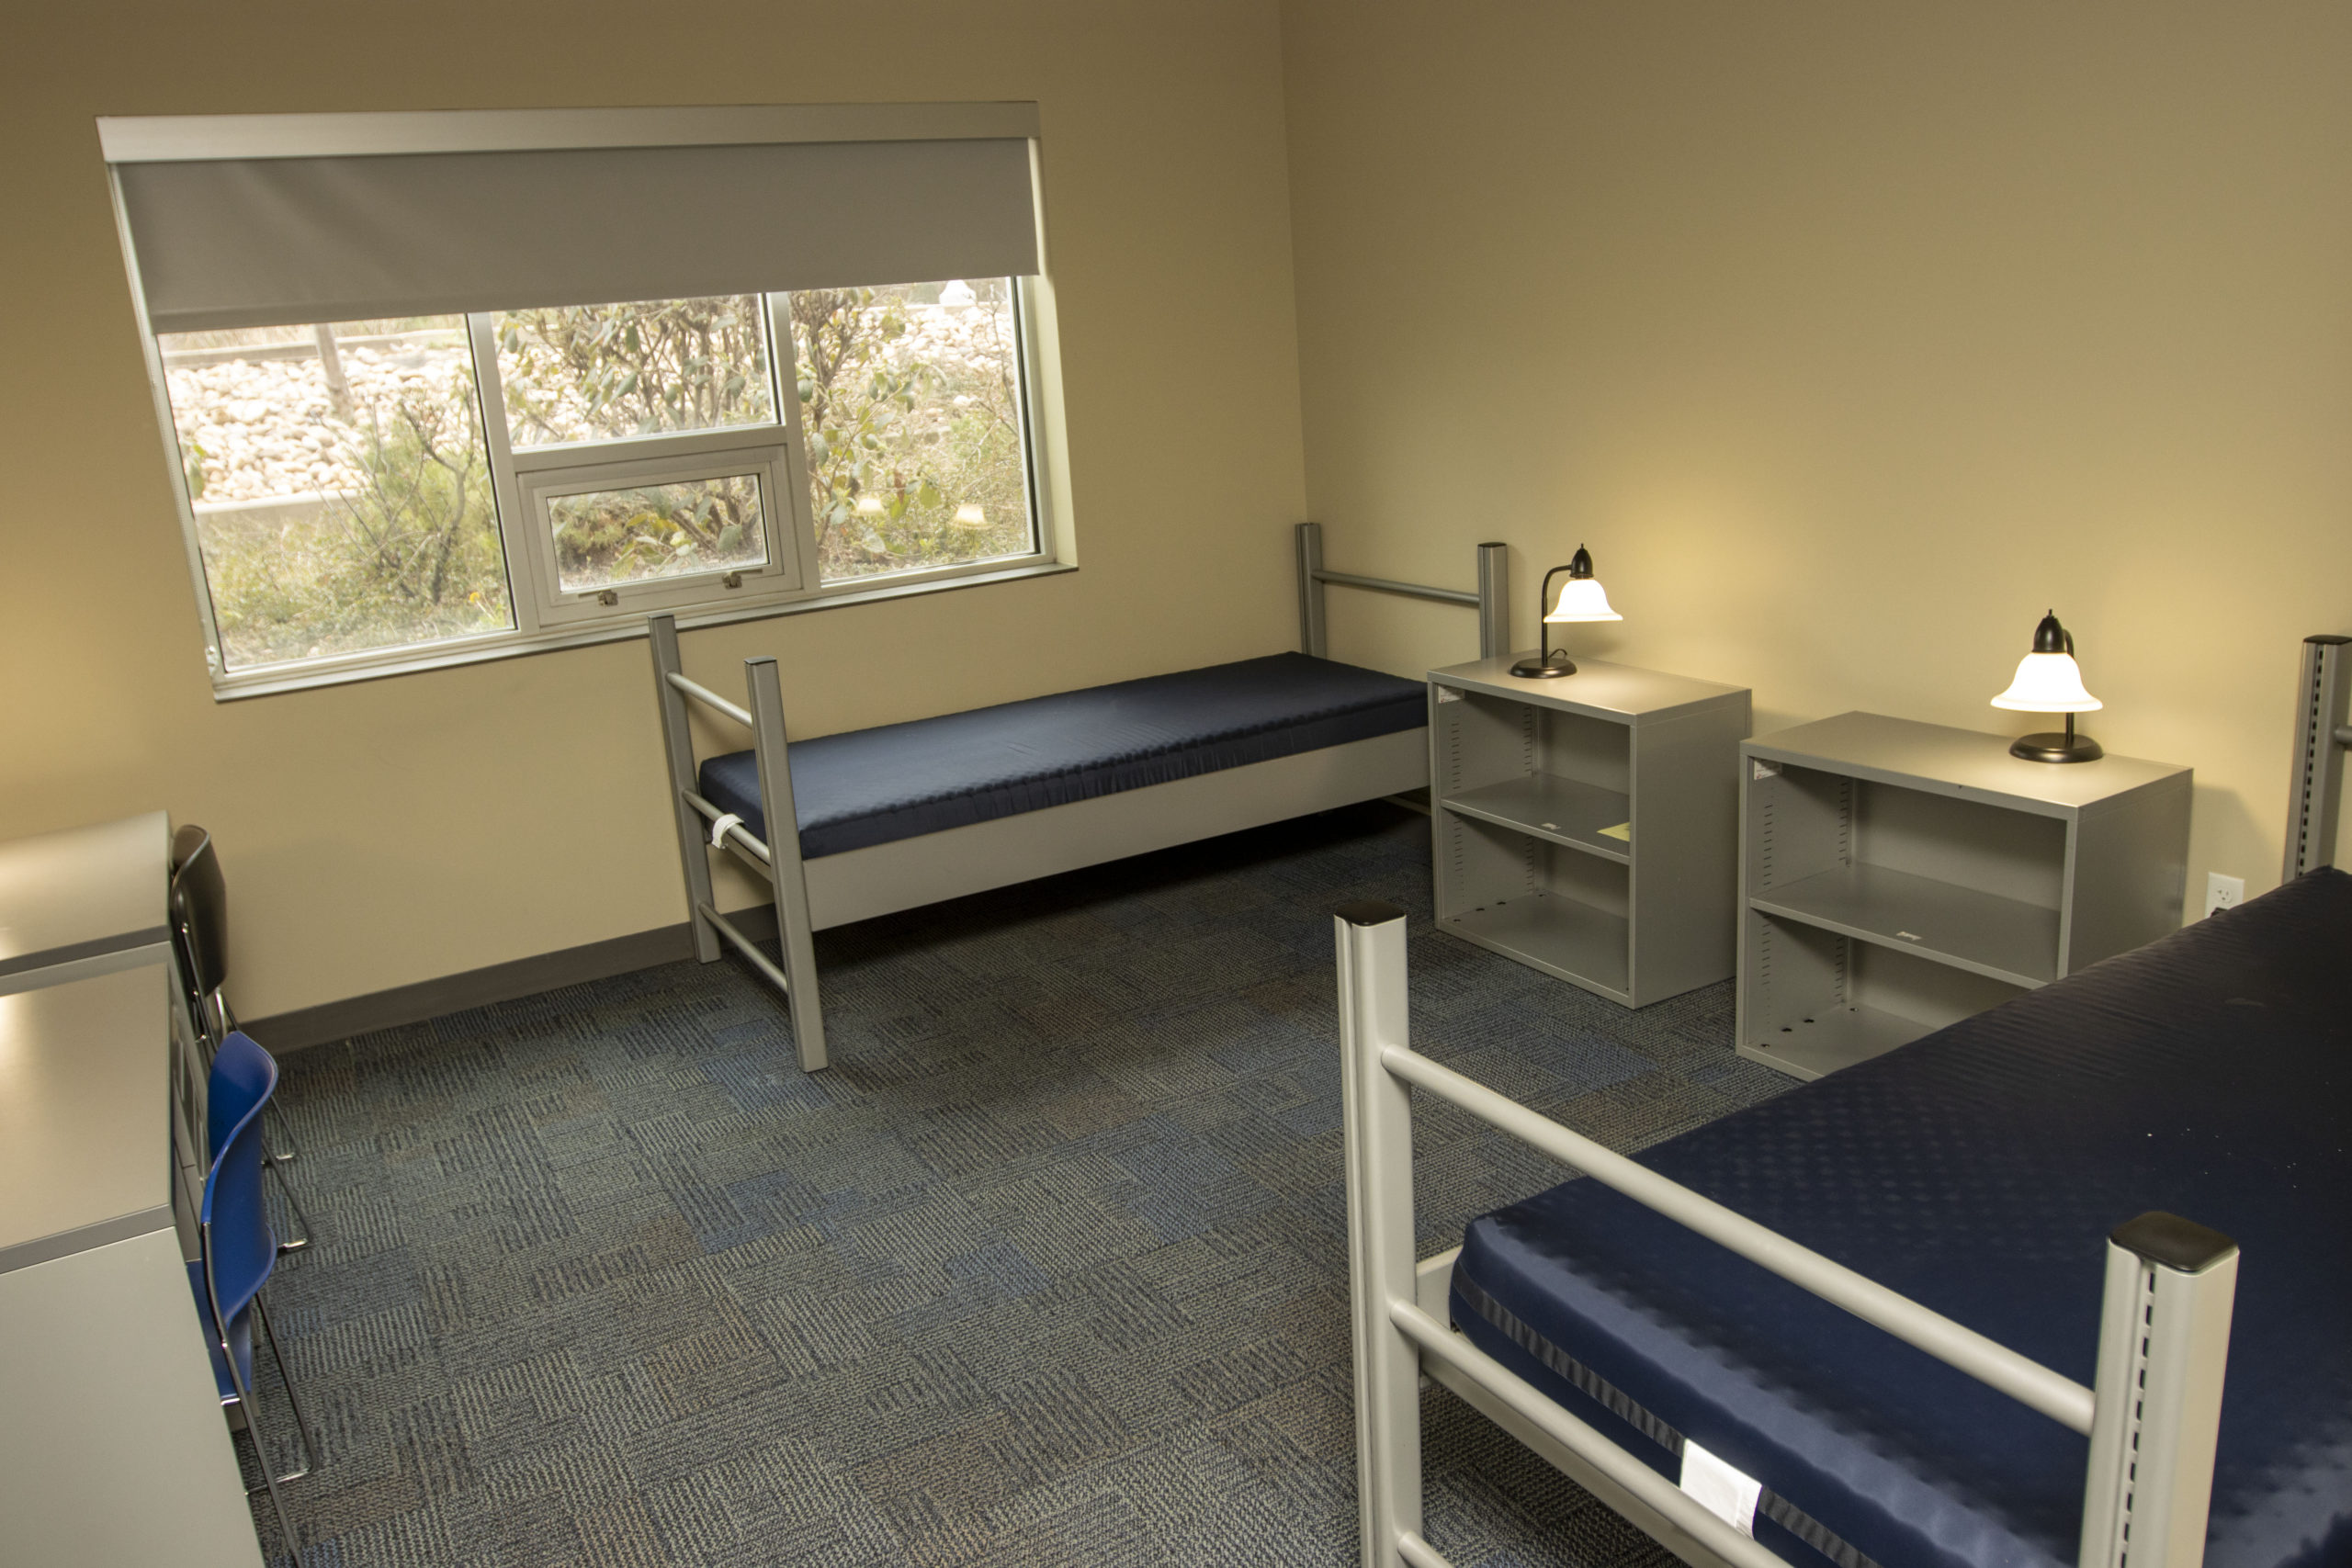 Dorm room at POST has two bunch beds, two desks and two book cases.